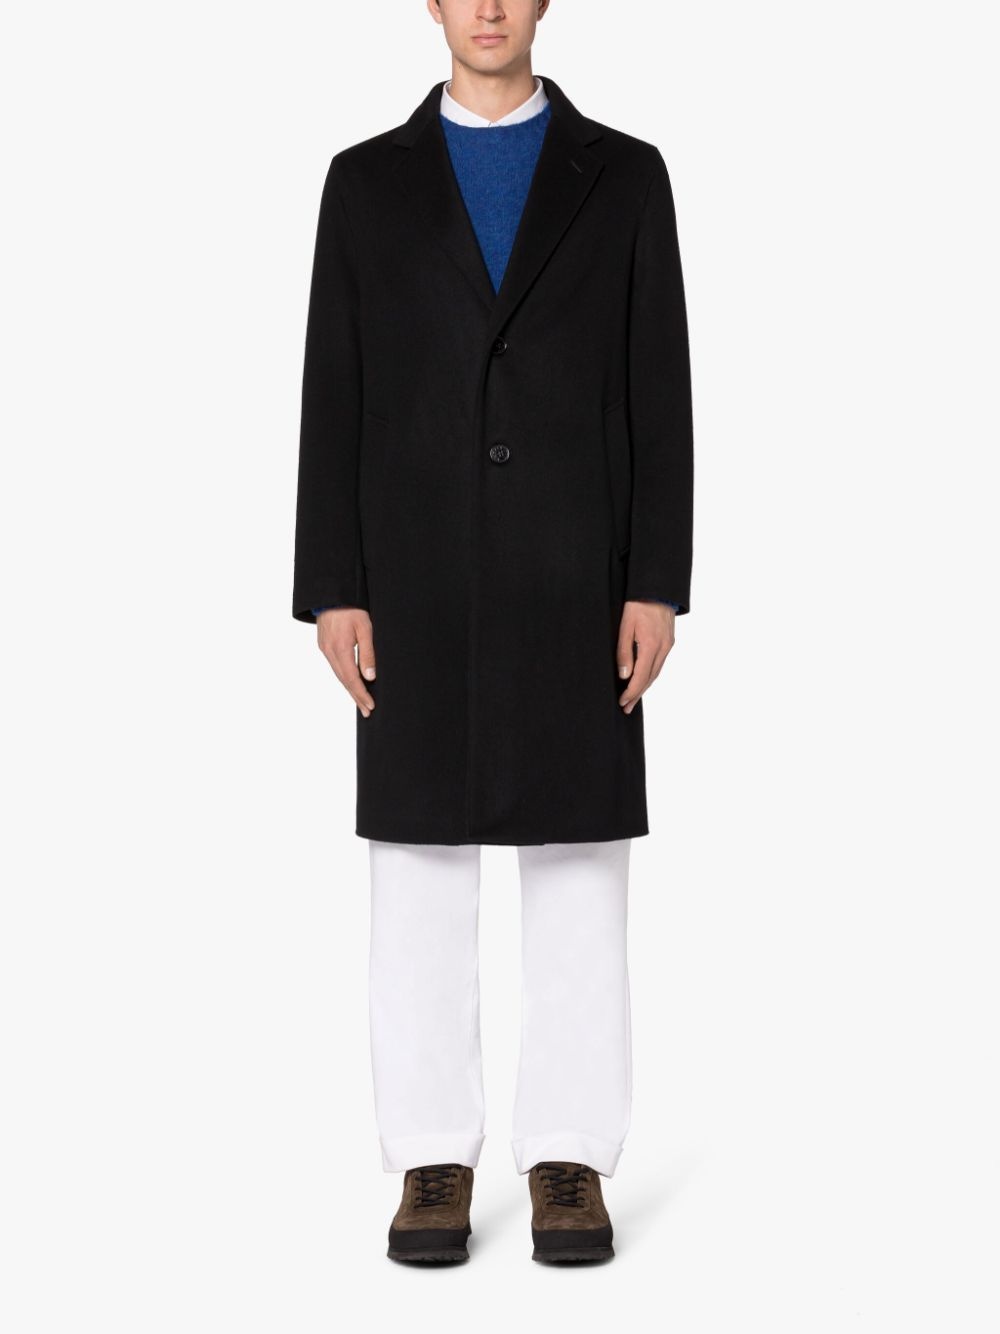 NEW STANLEY BLACK WOOL & CASHMERE COAT - 2